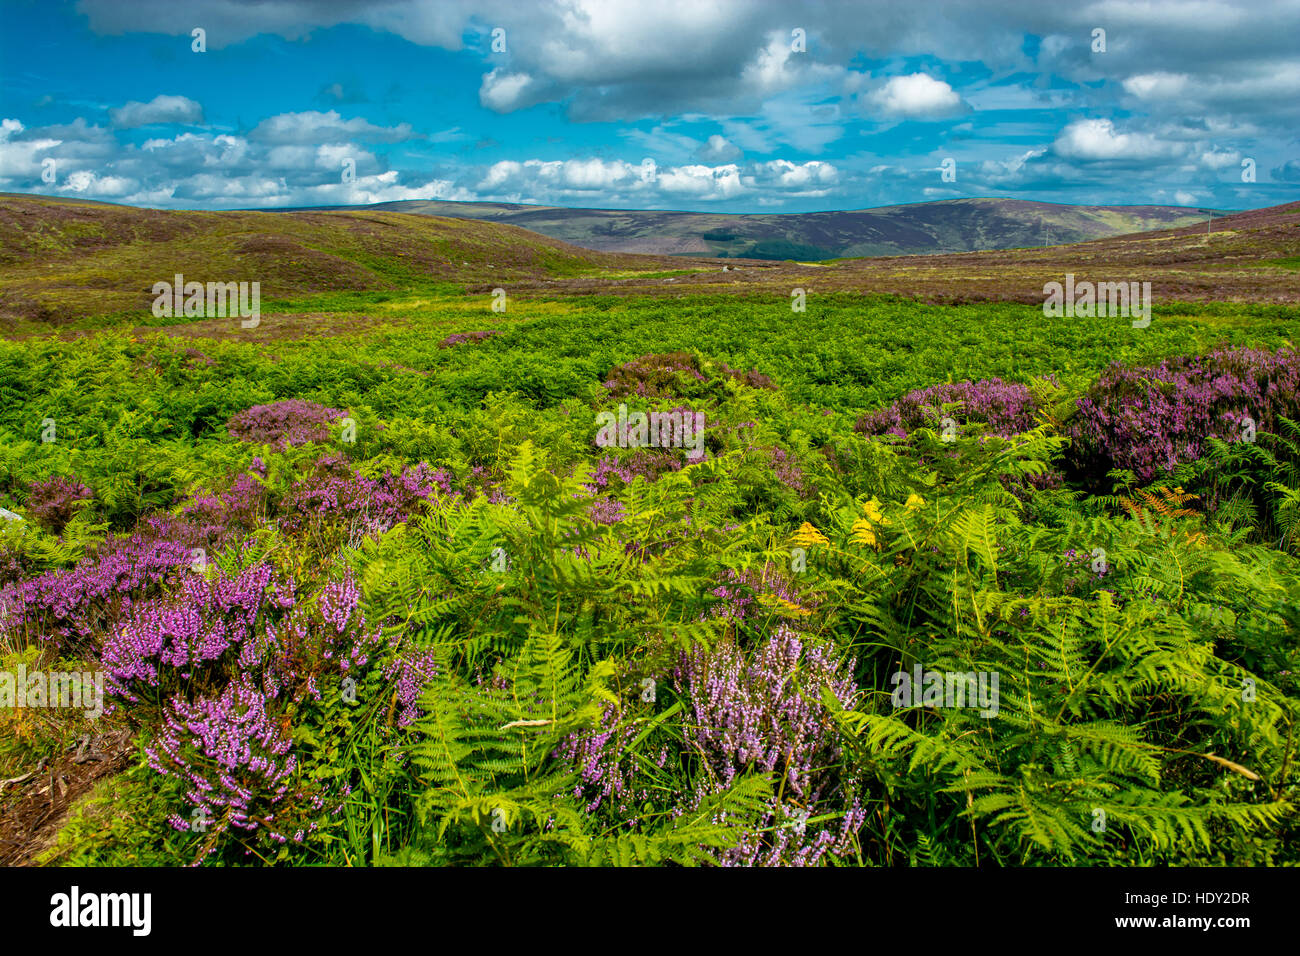 Landscape at Wicklow Mountains in Ireland Stock Photo